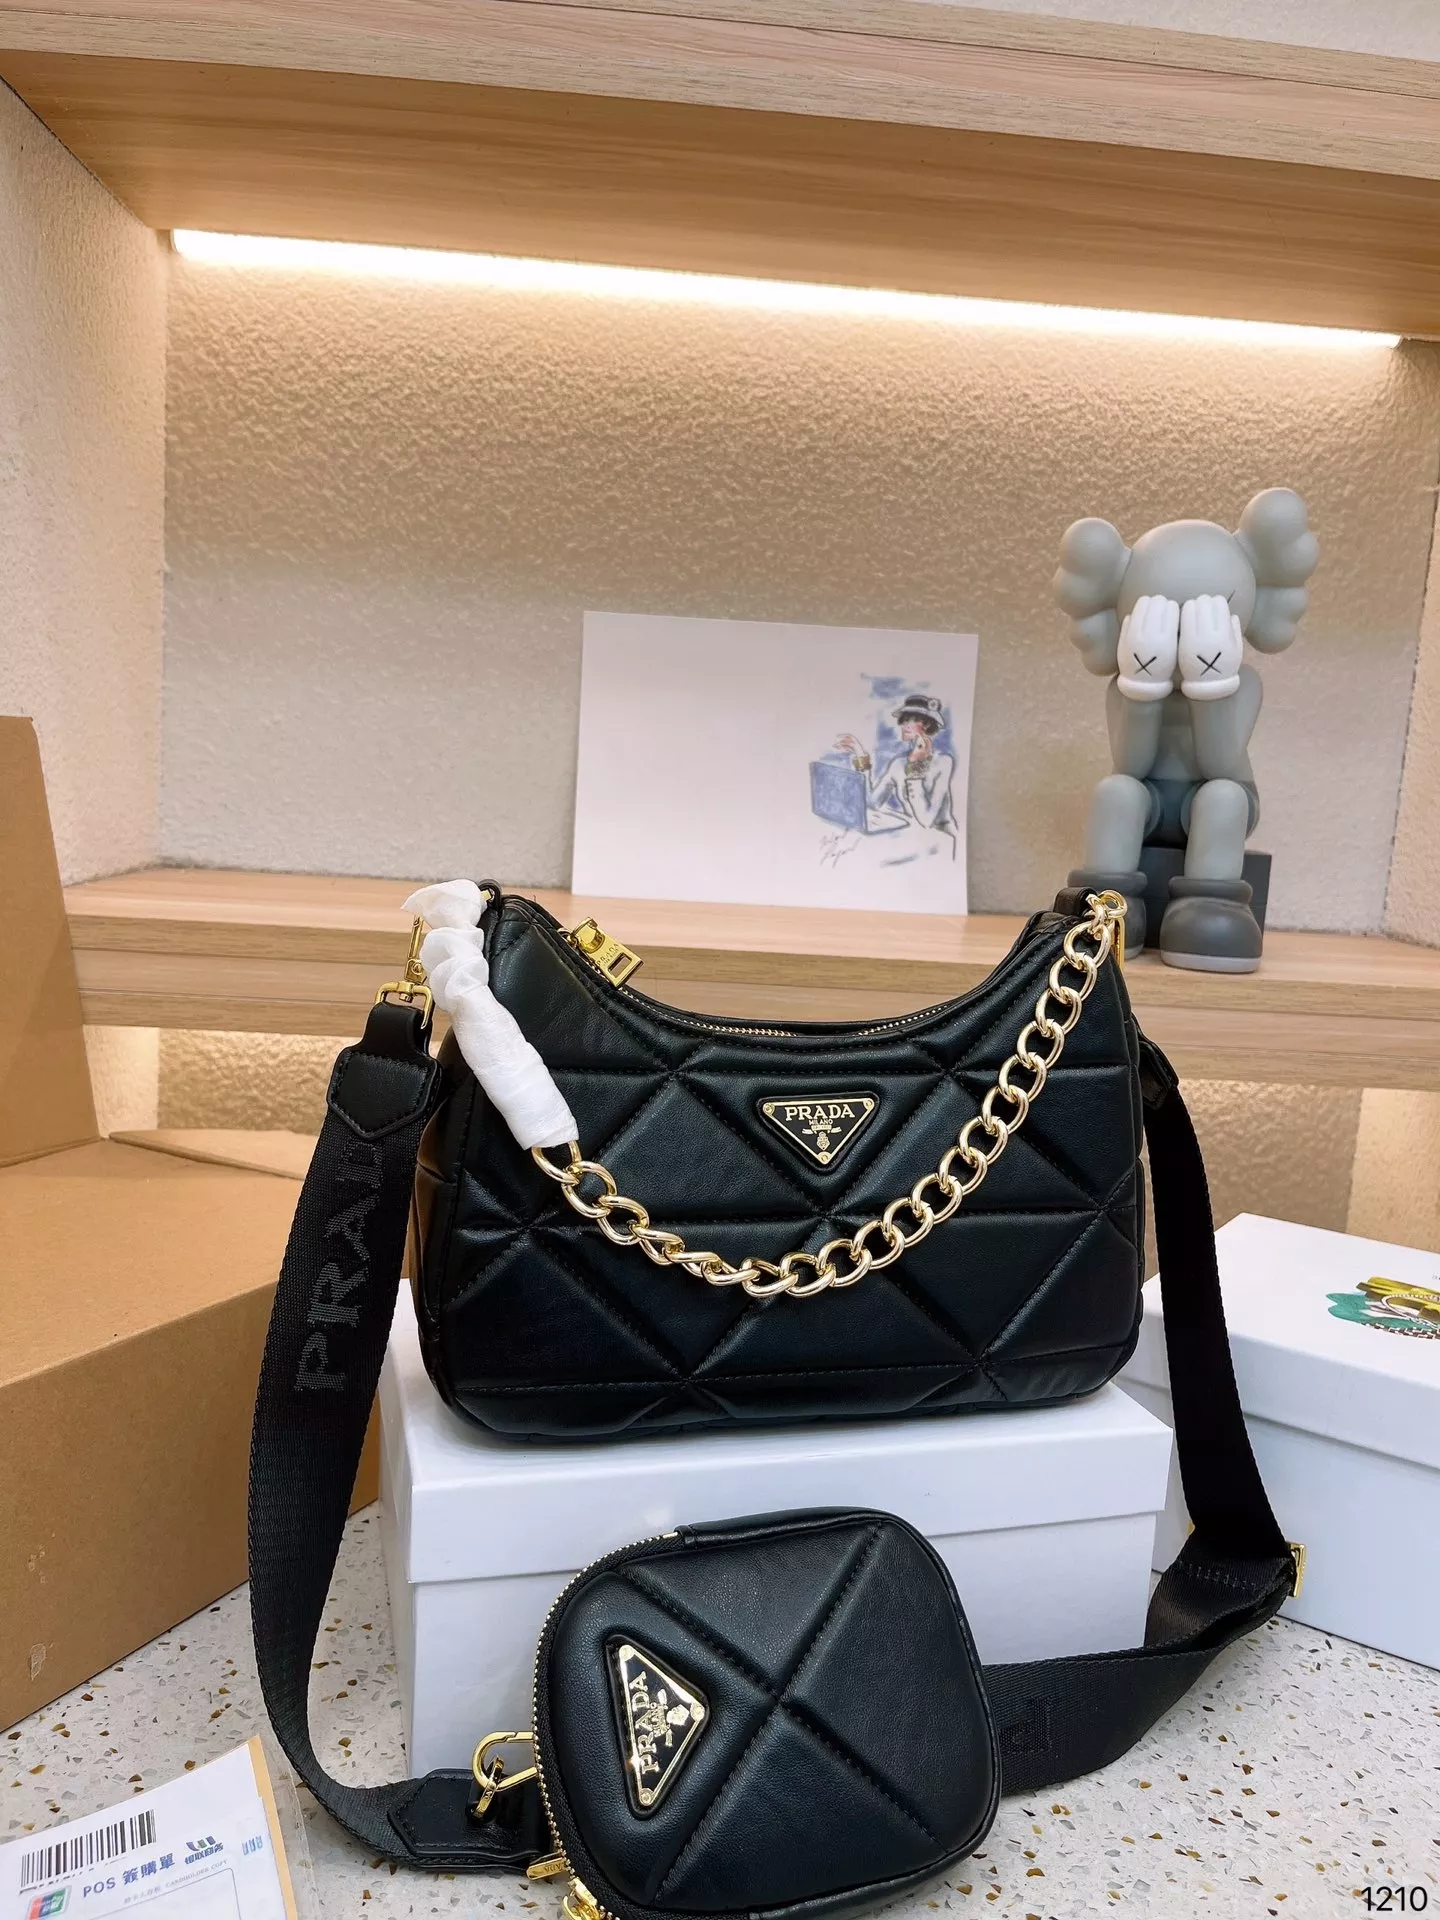 Forgot to post this unboxing. . . . . . #dior #chanel #gucci #fashion